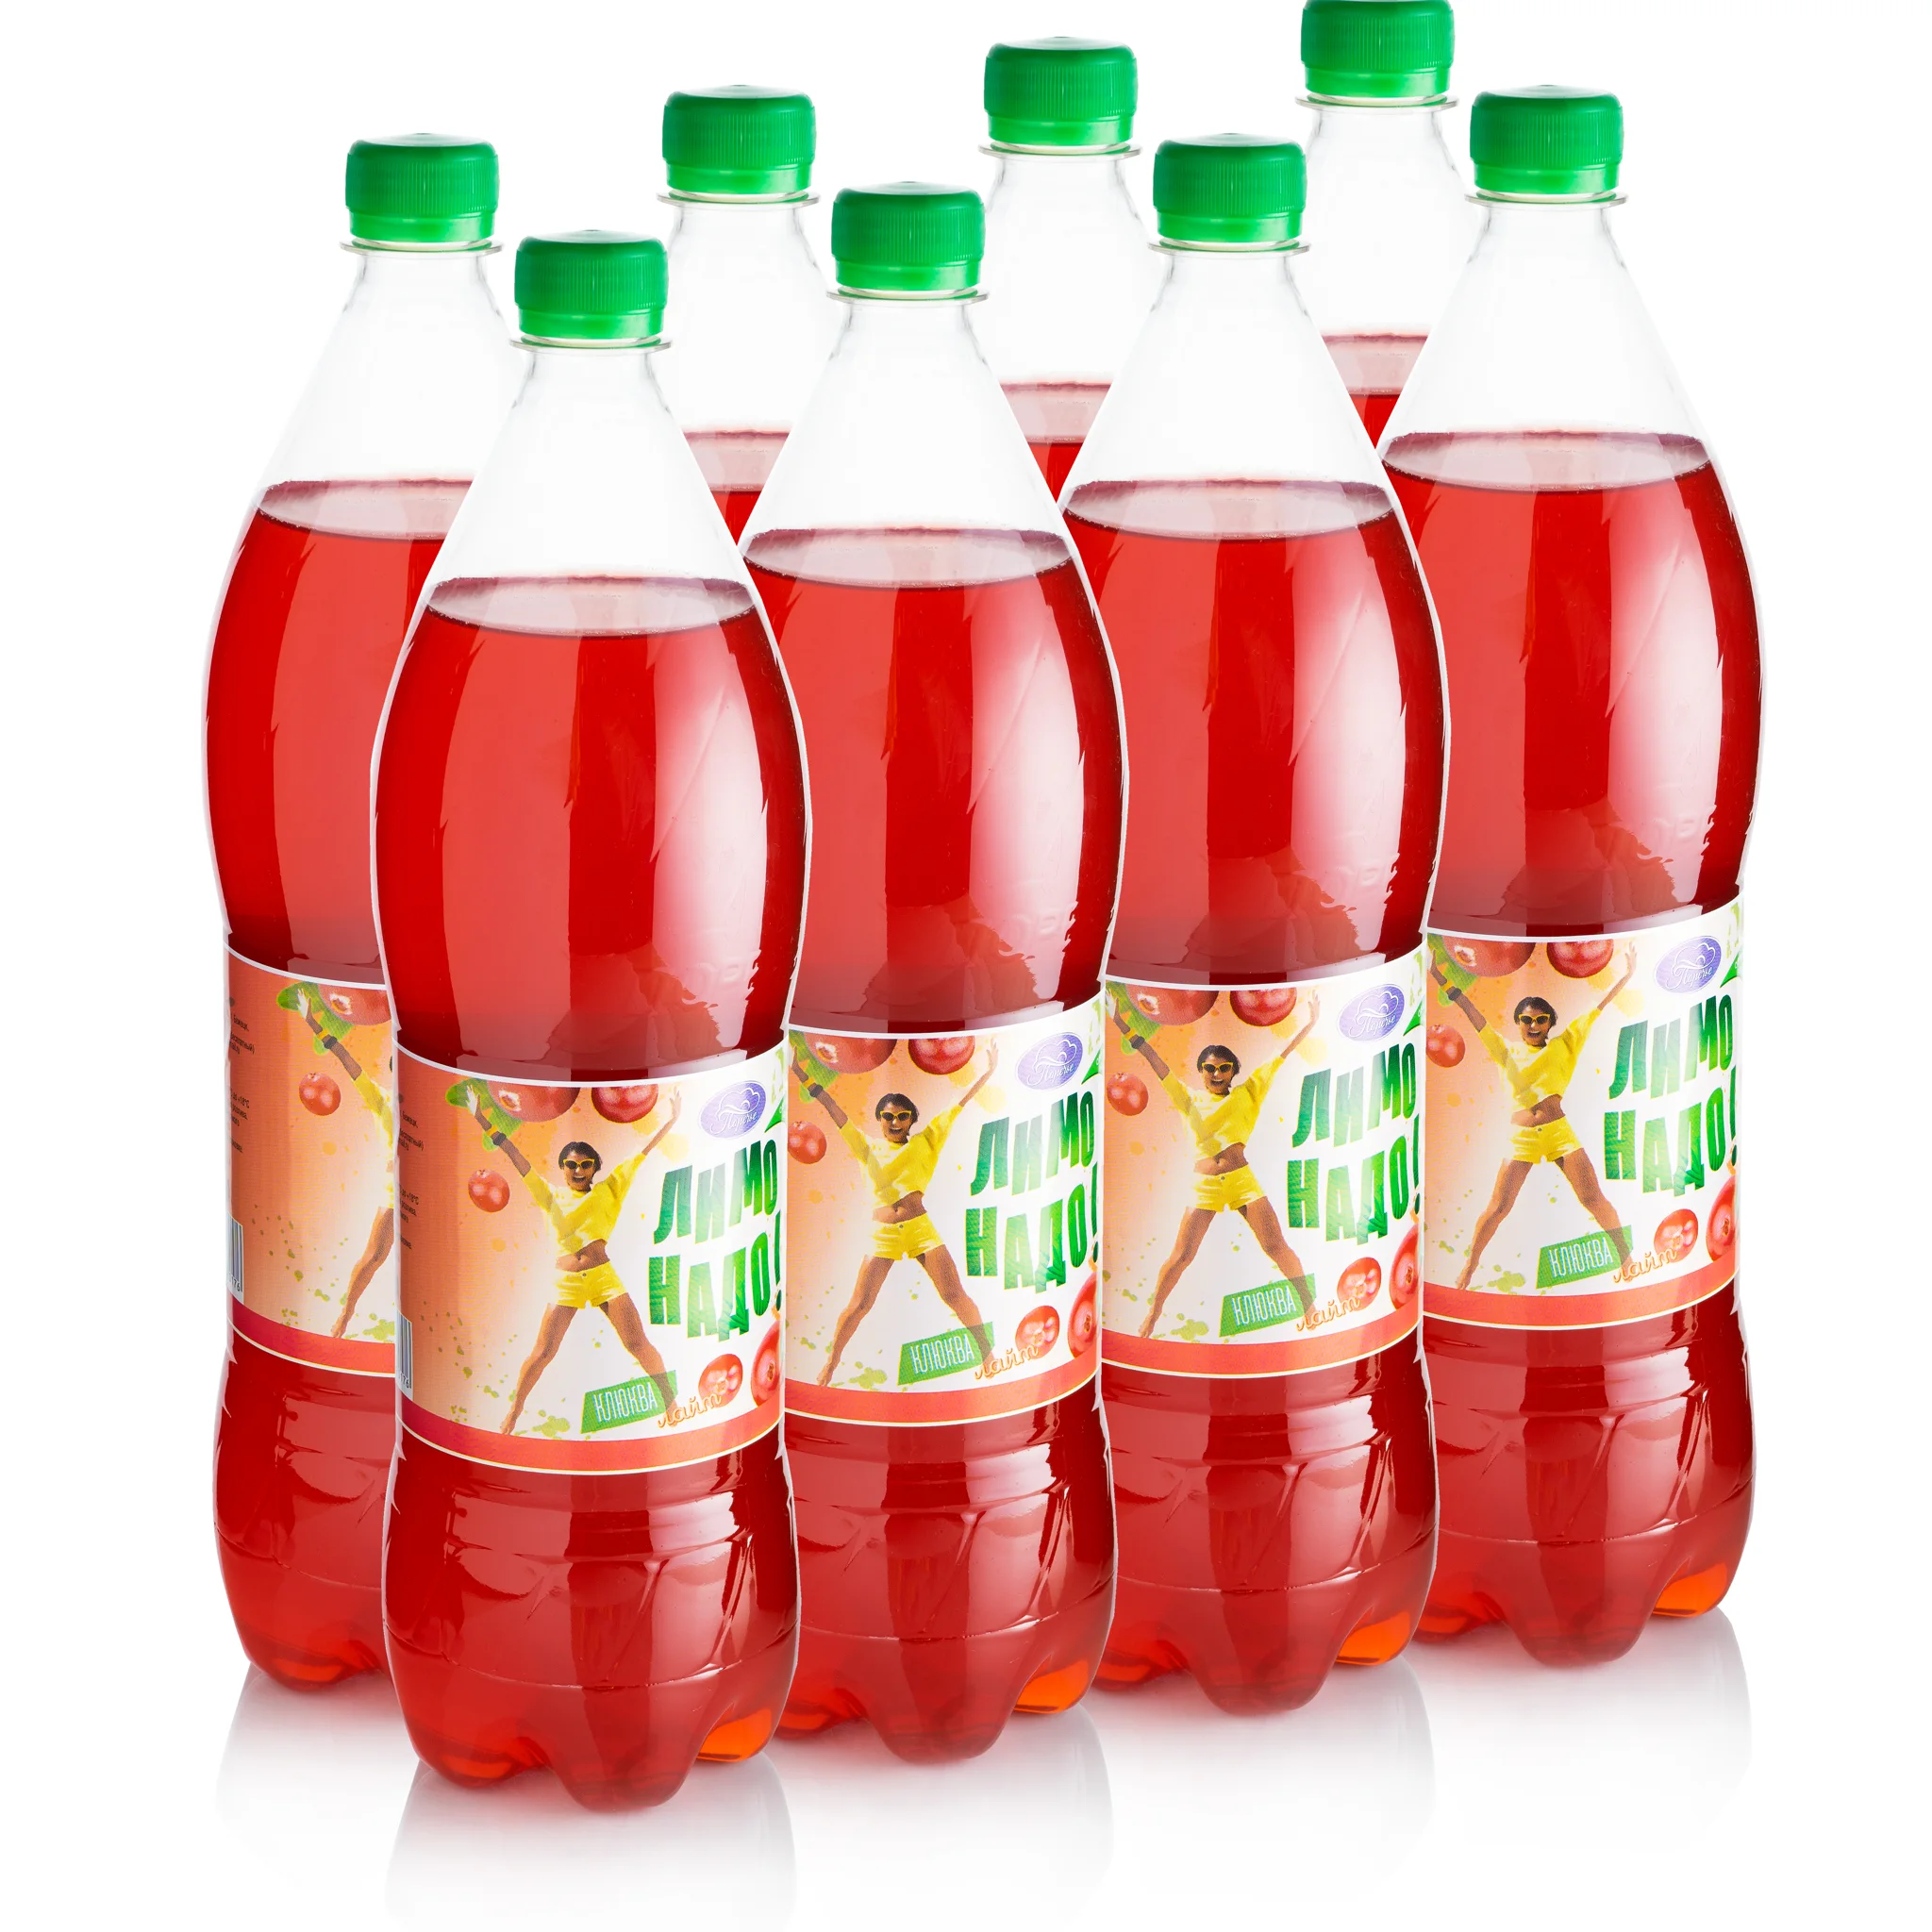 Cranberry flavored lemonade 1.5 liters highly carbonated "Pearl of the River"